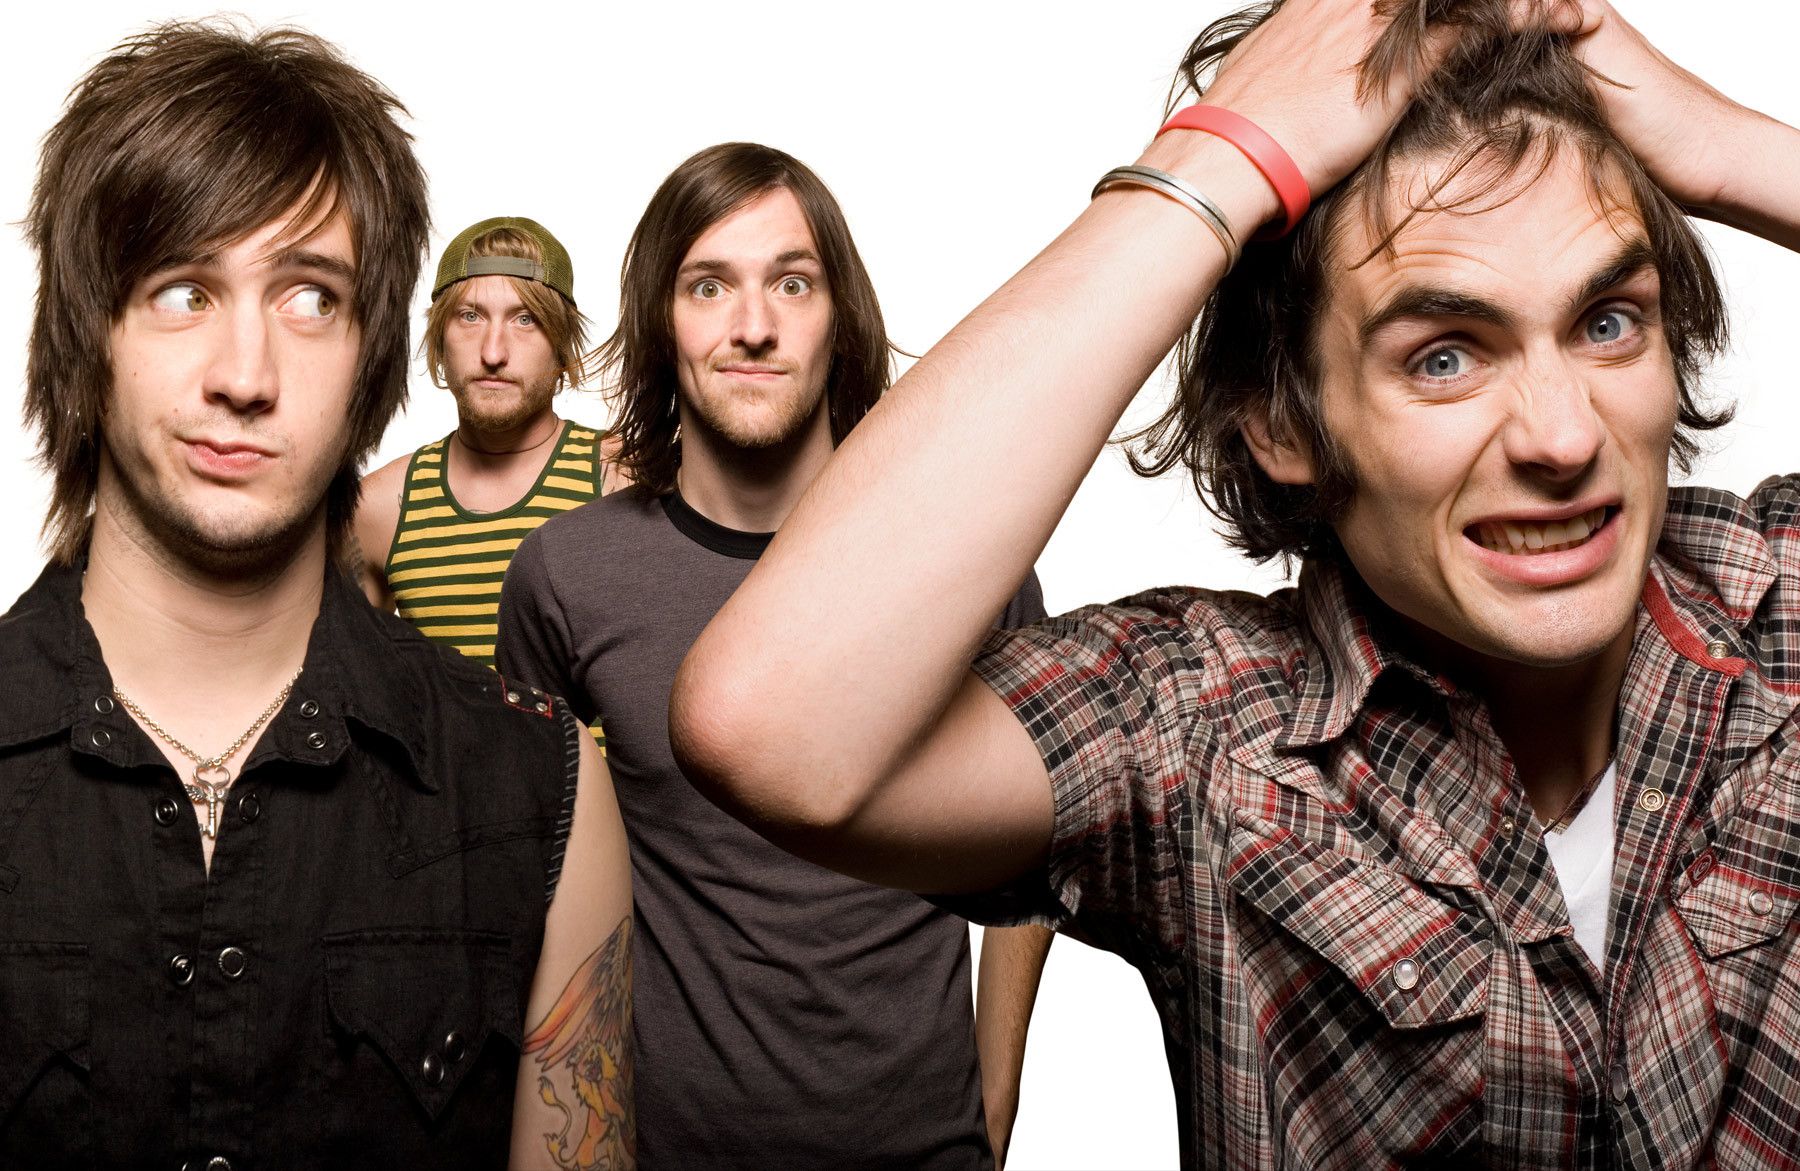 The All American Rejects Wallpaper, Music, HQ The All American Rejects PictureK Wallpaper 2019